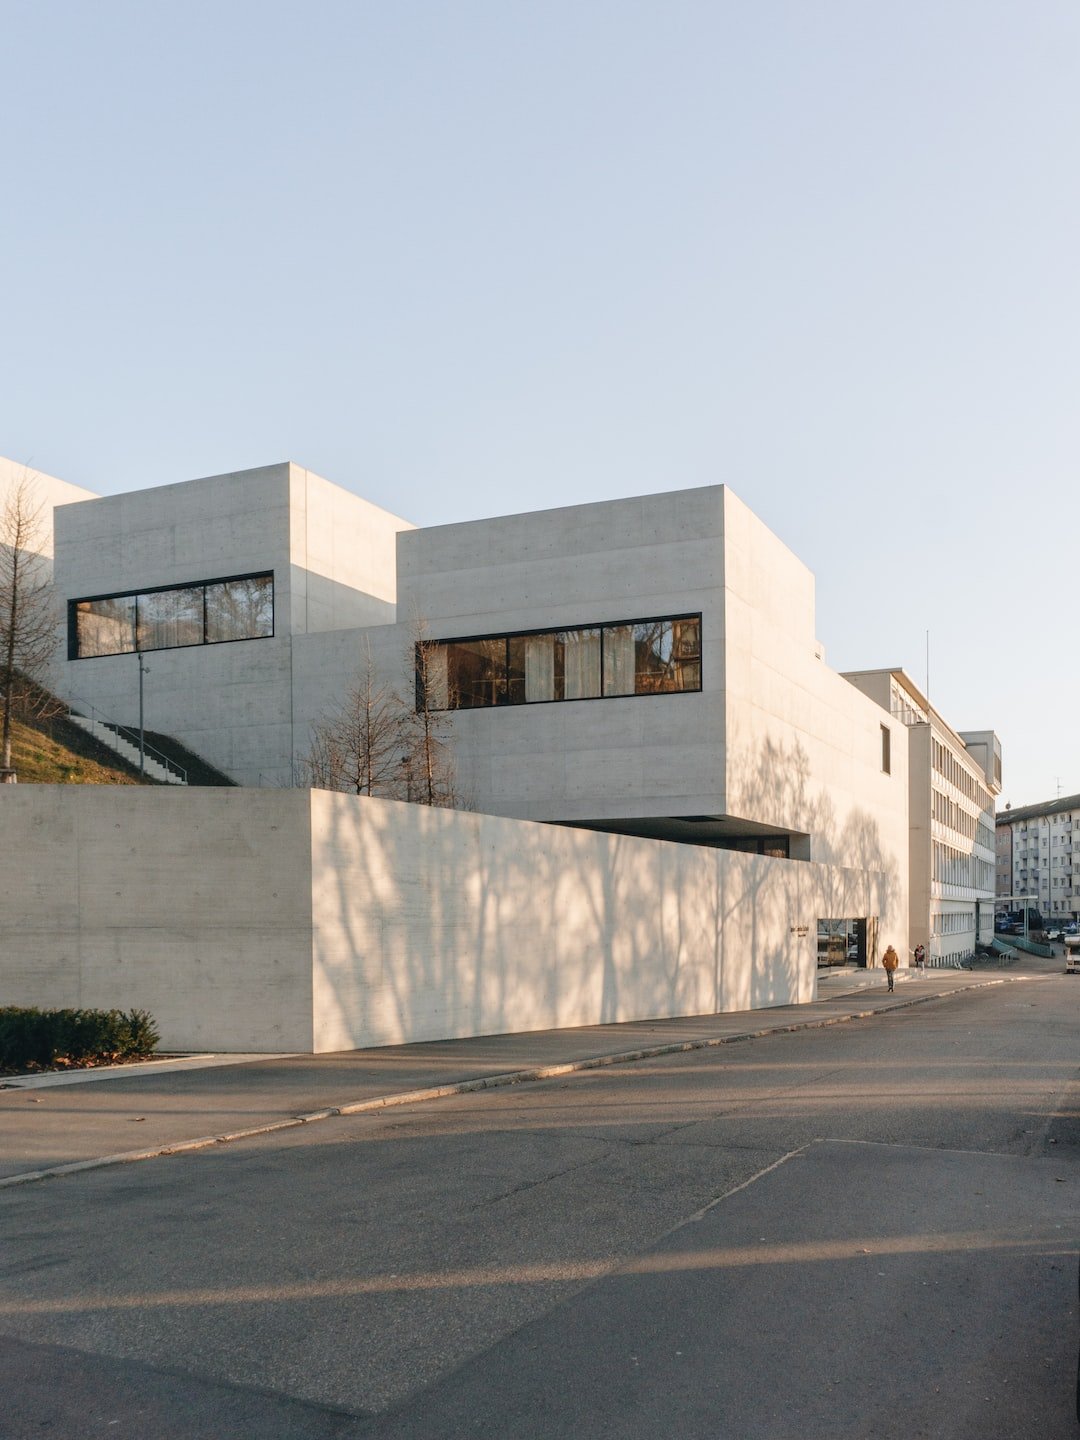 white concrete building near bare trees during daytime